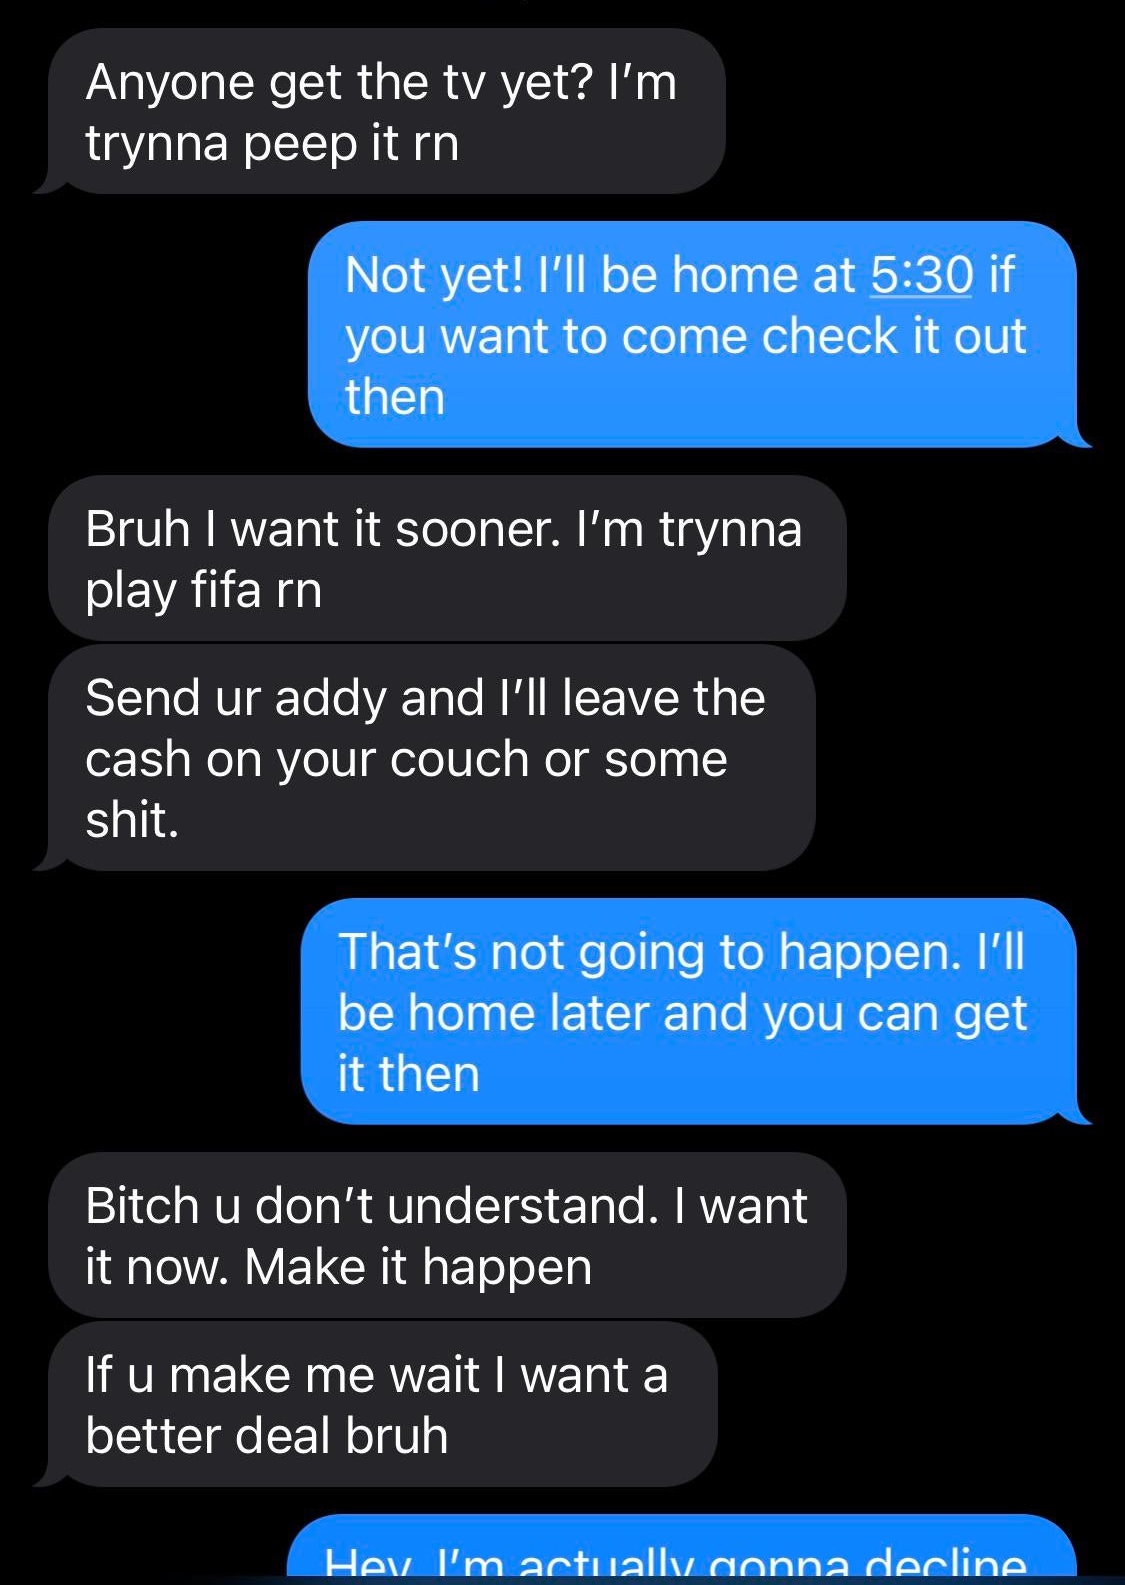 software - Anyone get the tv yet? I'm trynna peep it rn Not yet! I'll be home at if you want to come check it out then Bruh I want it sooner. I'm trynna play fifa rn Send ur addy and I'll leave the cash on your couch or some shit. That's not going to happ